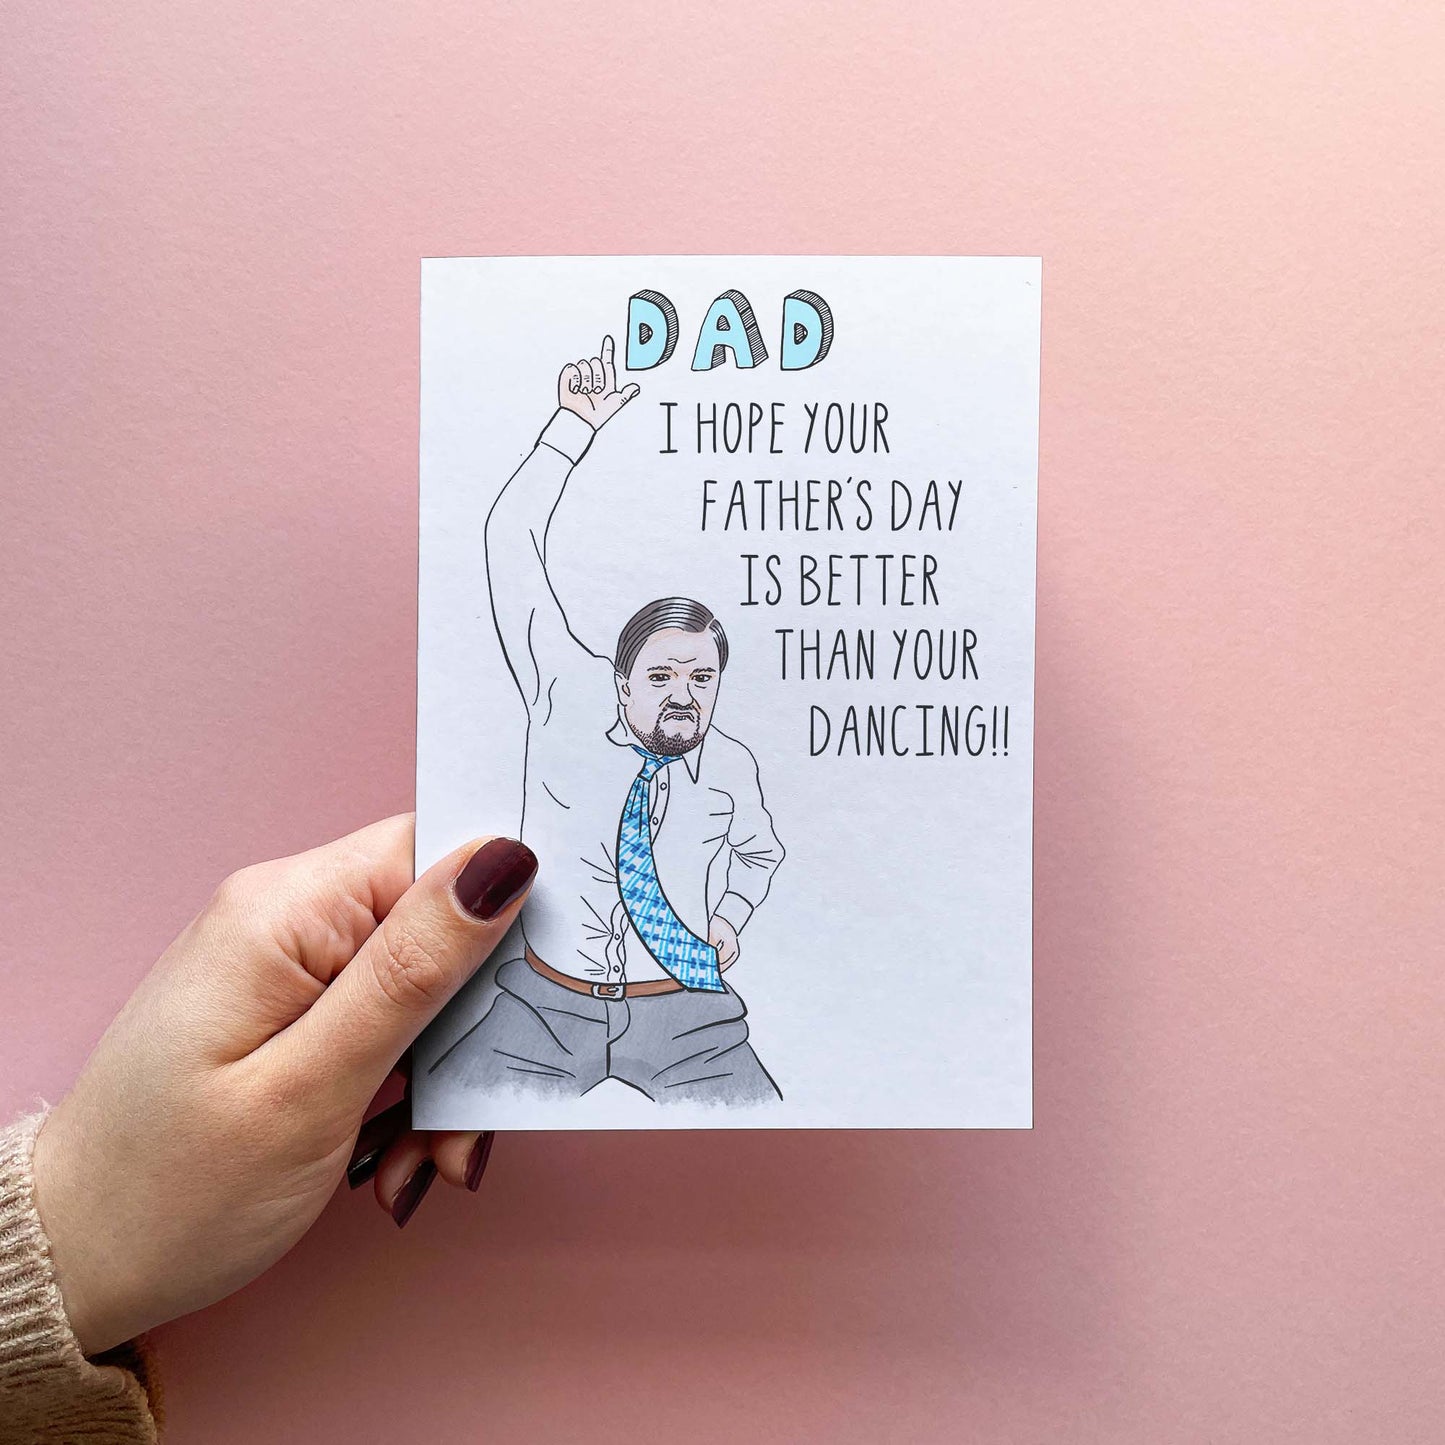 Dad Dancing - Funny Father's Day Card